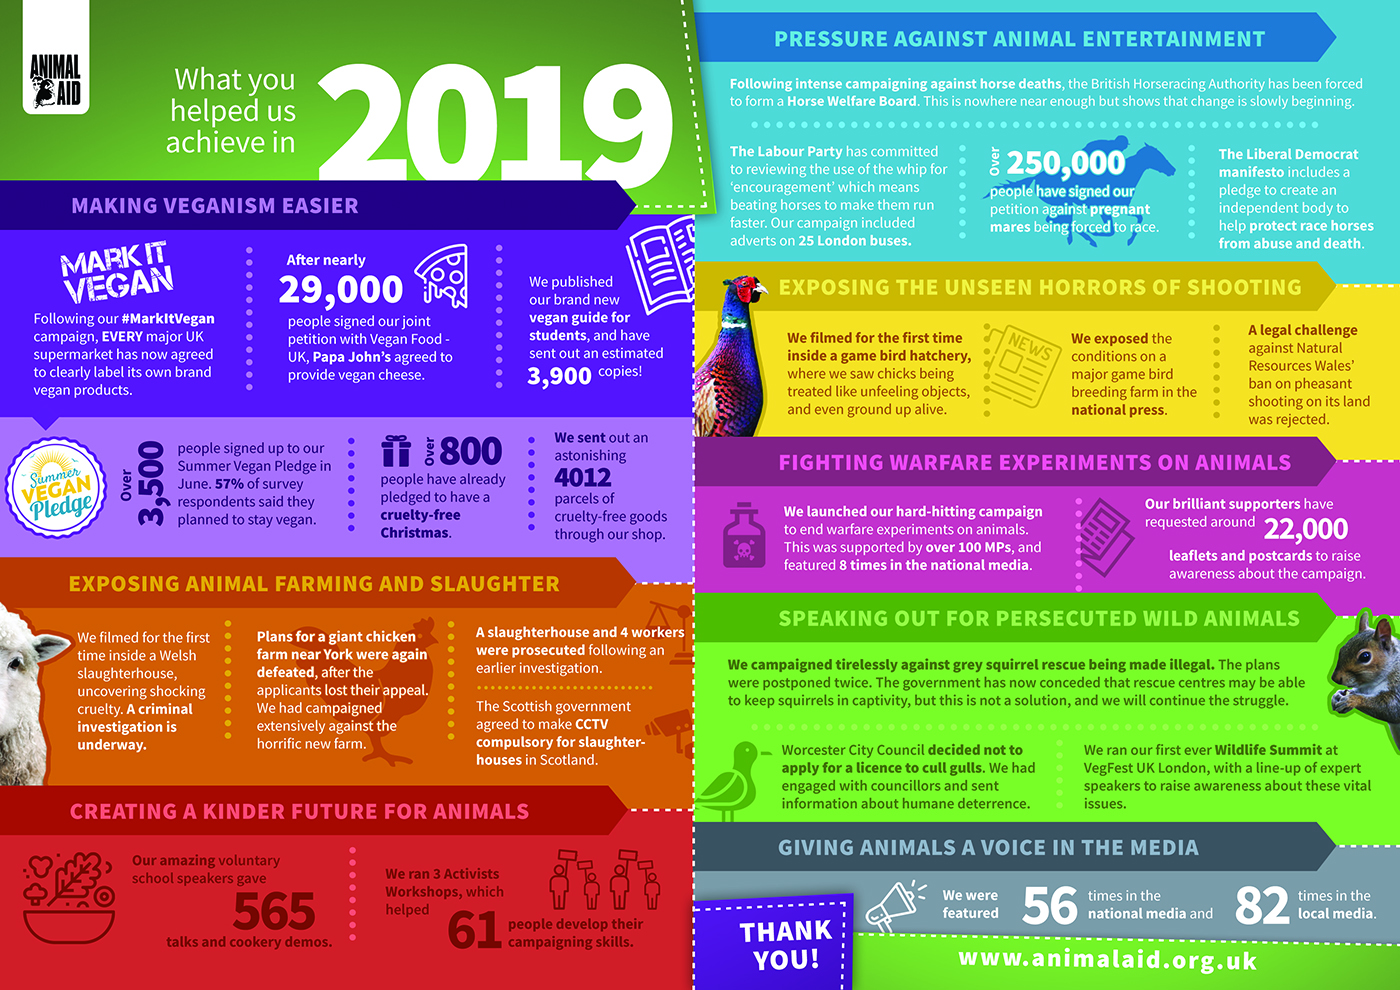 What you helped us achieve for animals in 2019